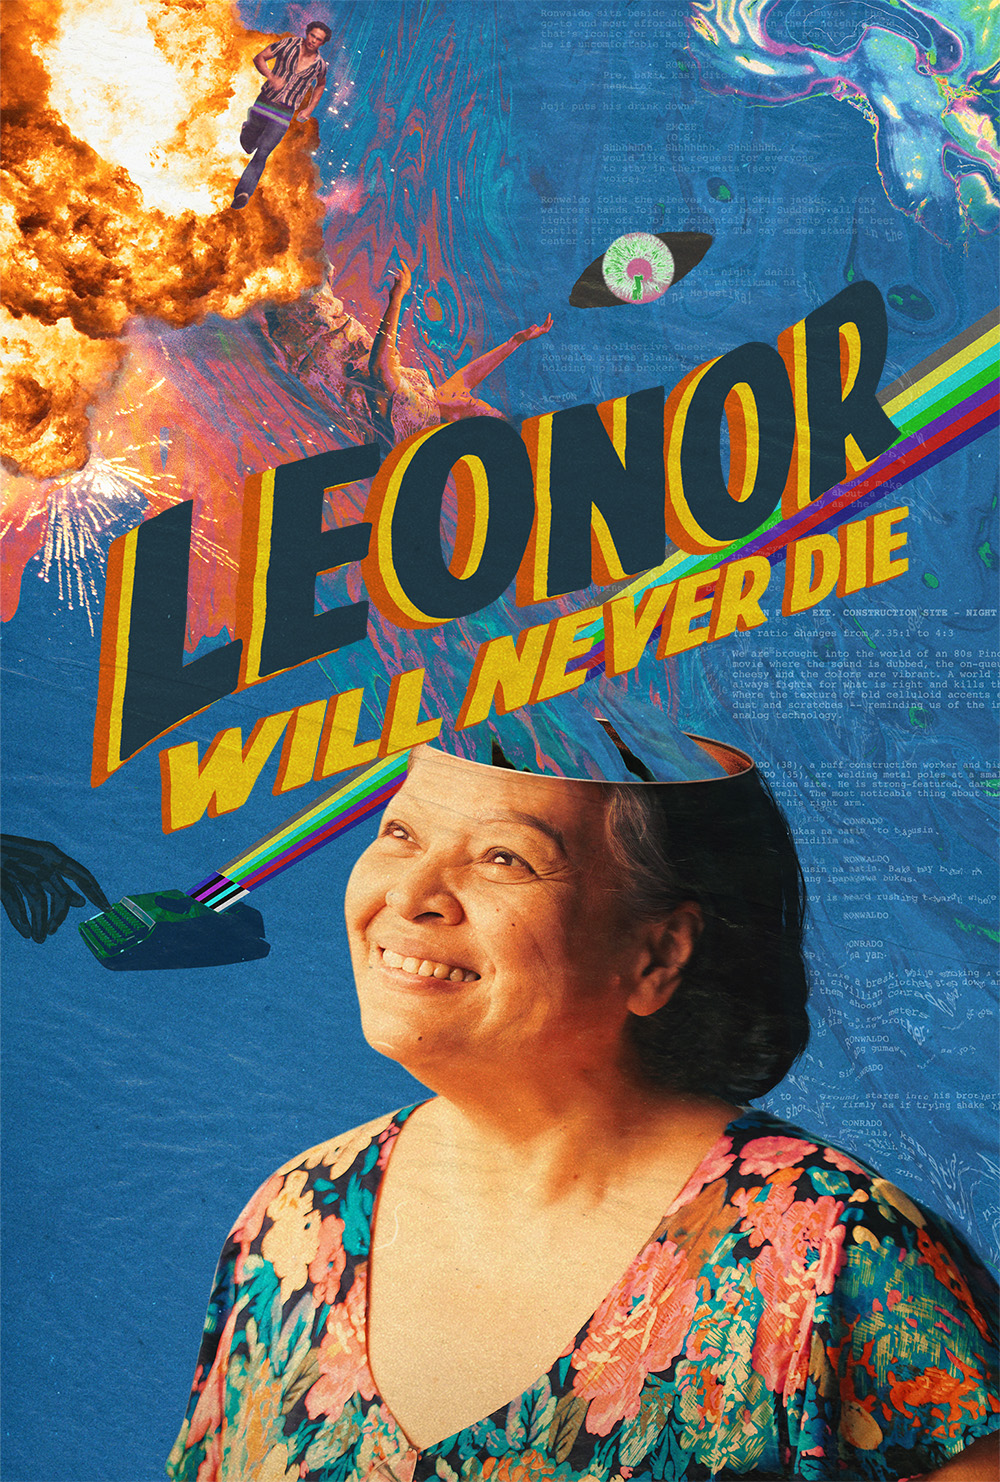 Leonor Will Never Die